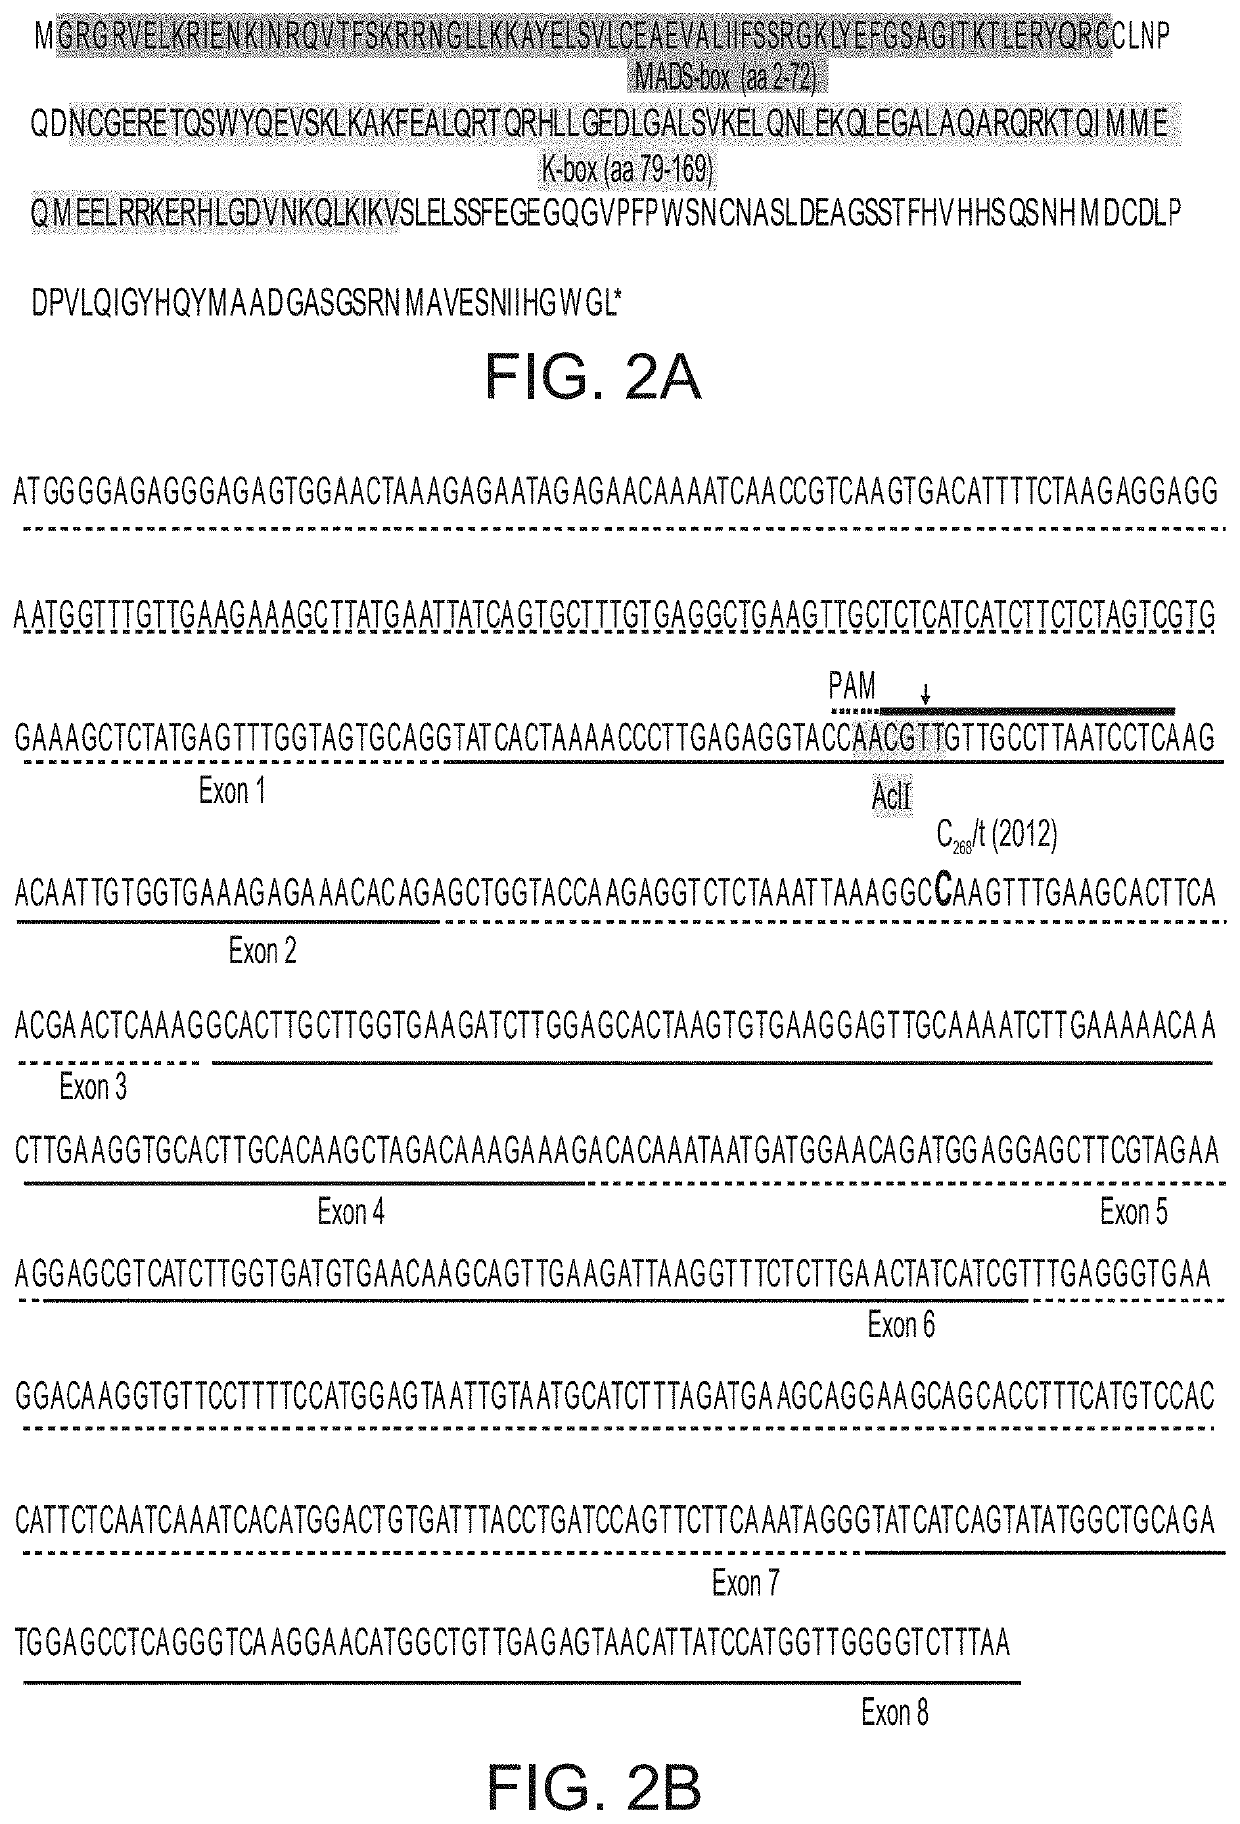 Parthenocarpic plants and methods of producing same